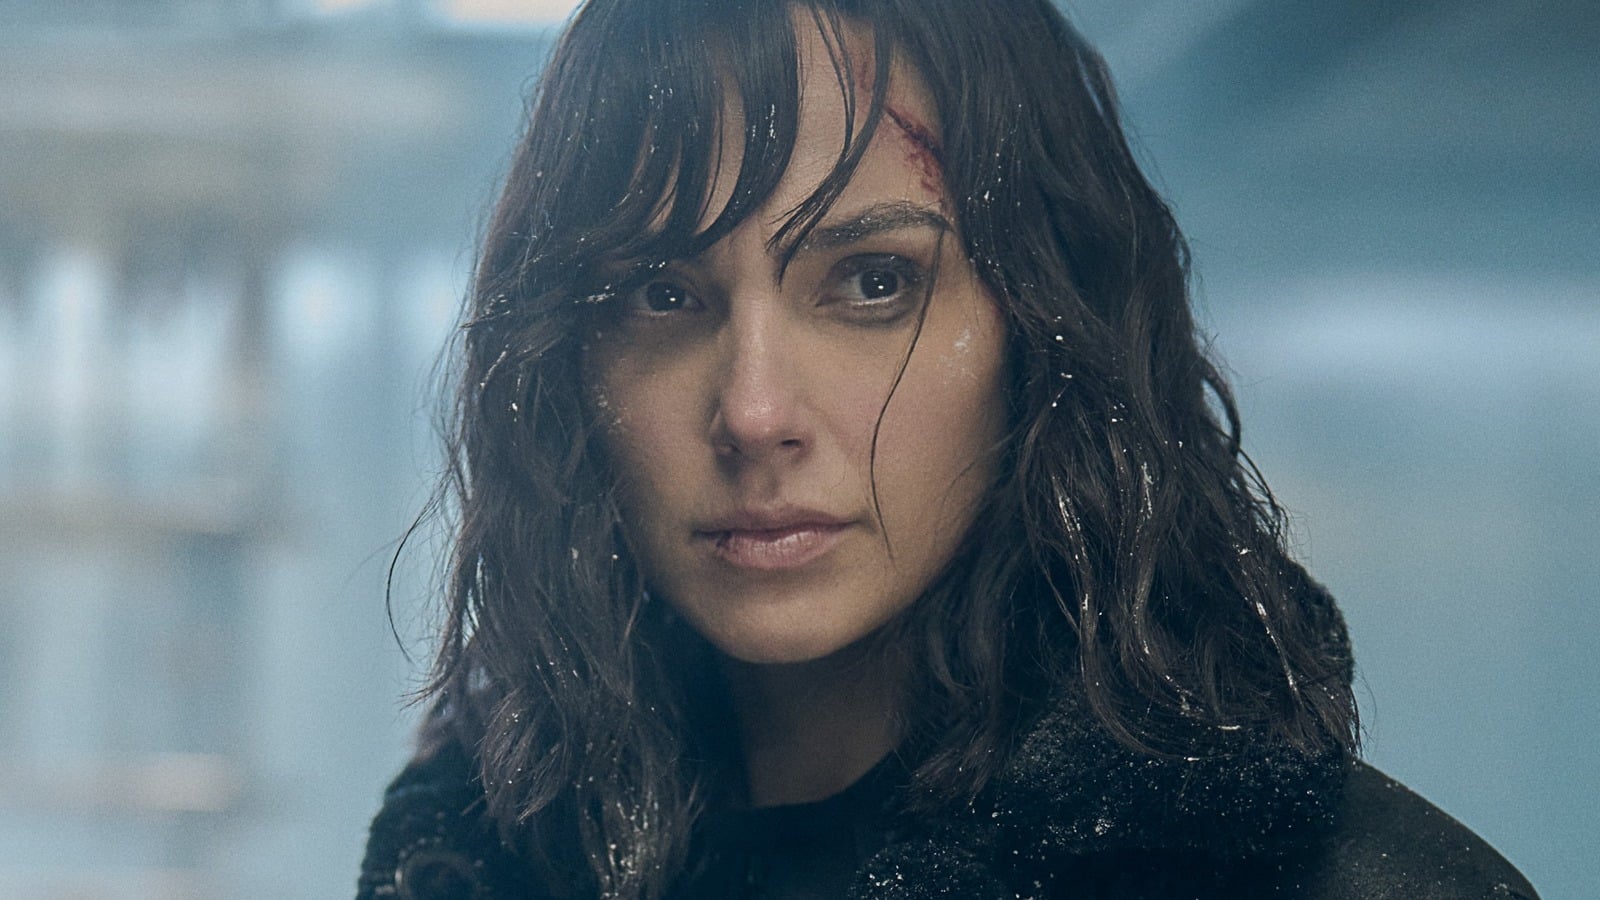 Gal Gadot Spy Thriller Lands With A Thud Among Rotten Tomatoes Critics 1